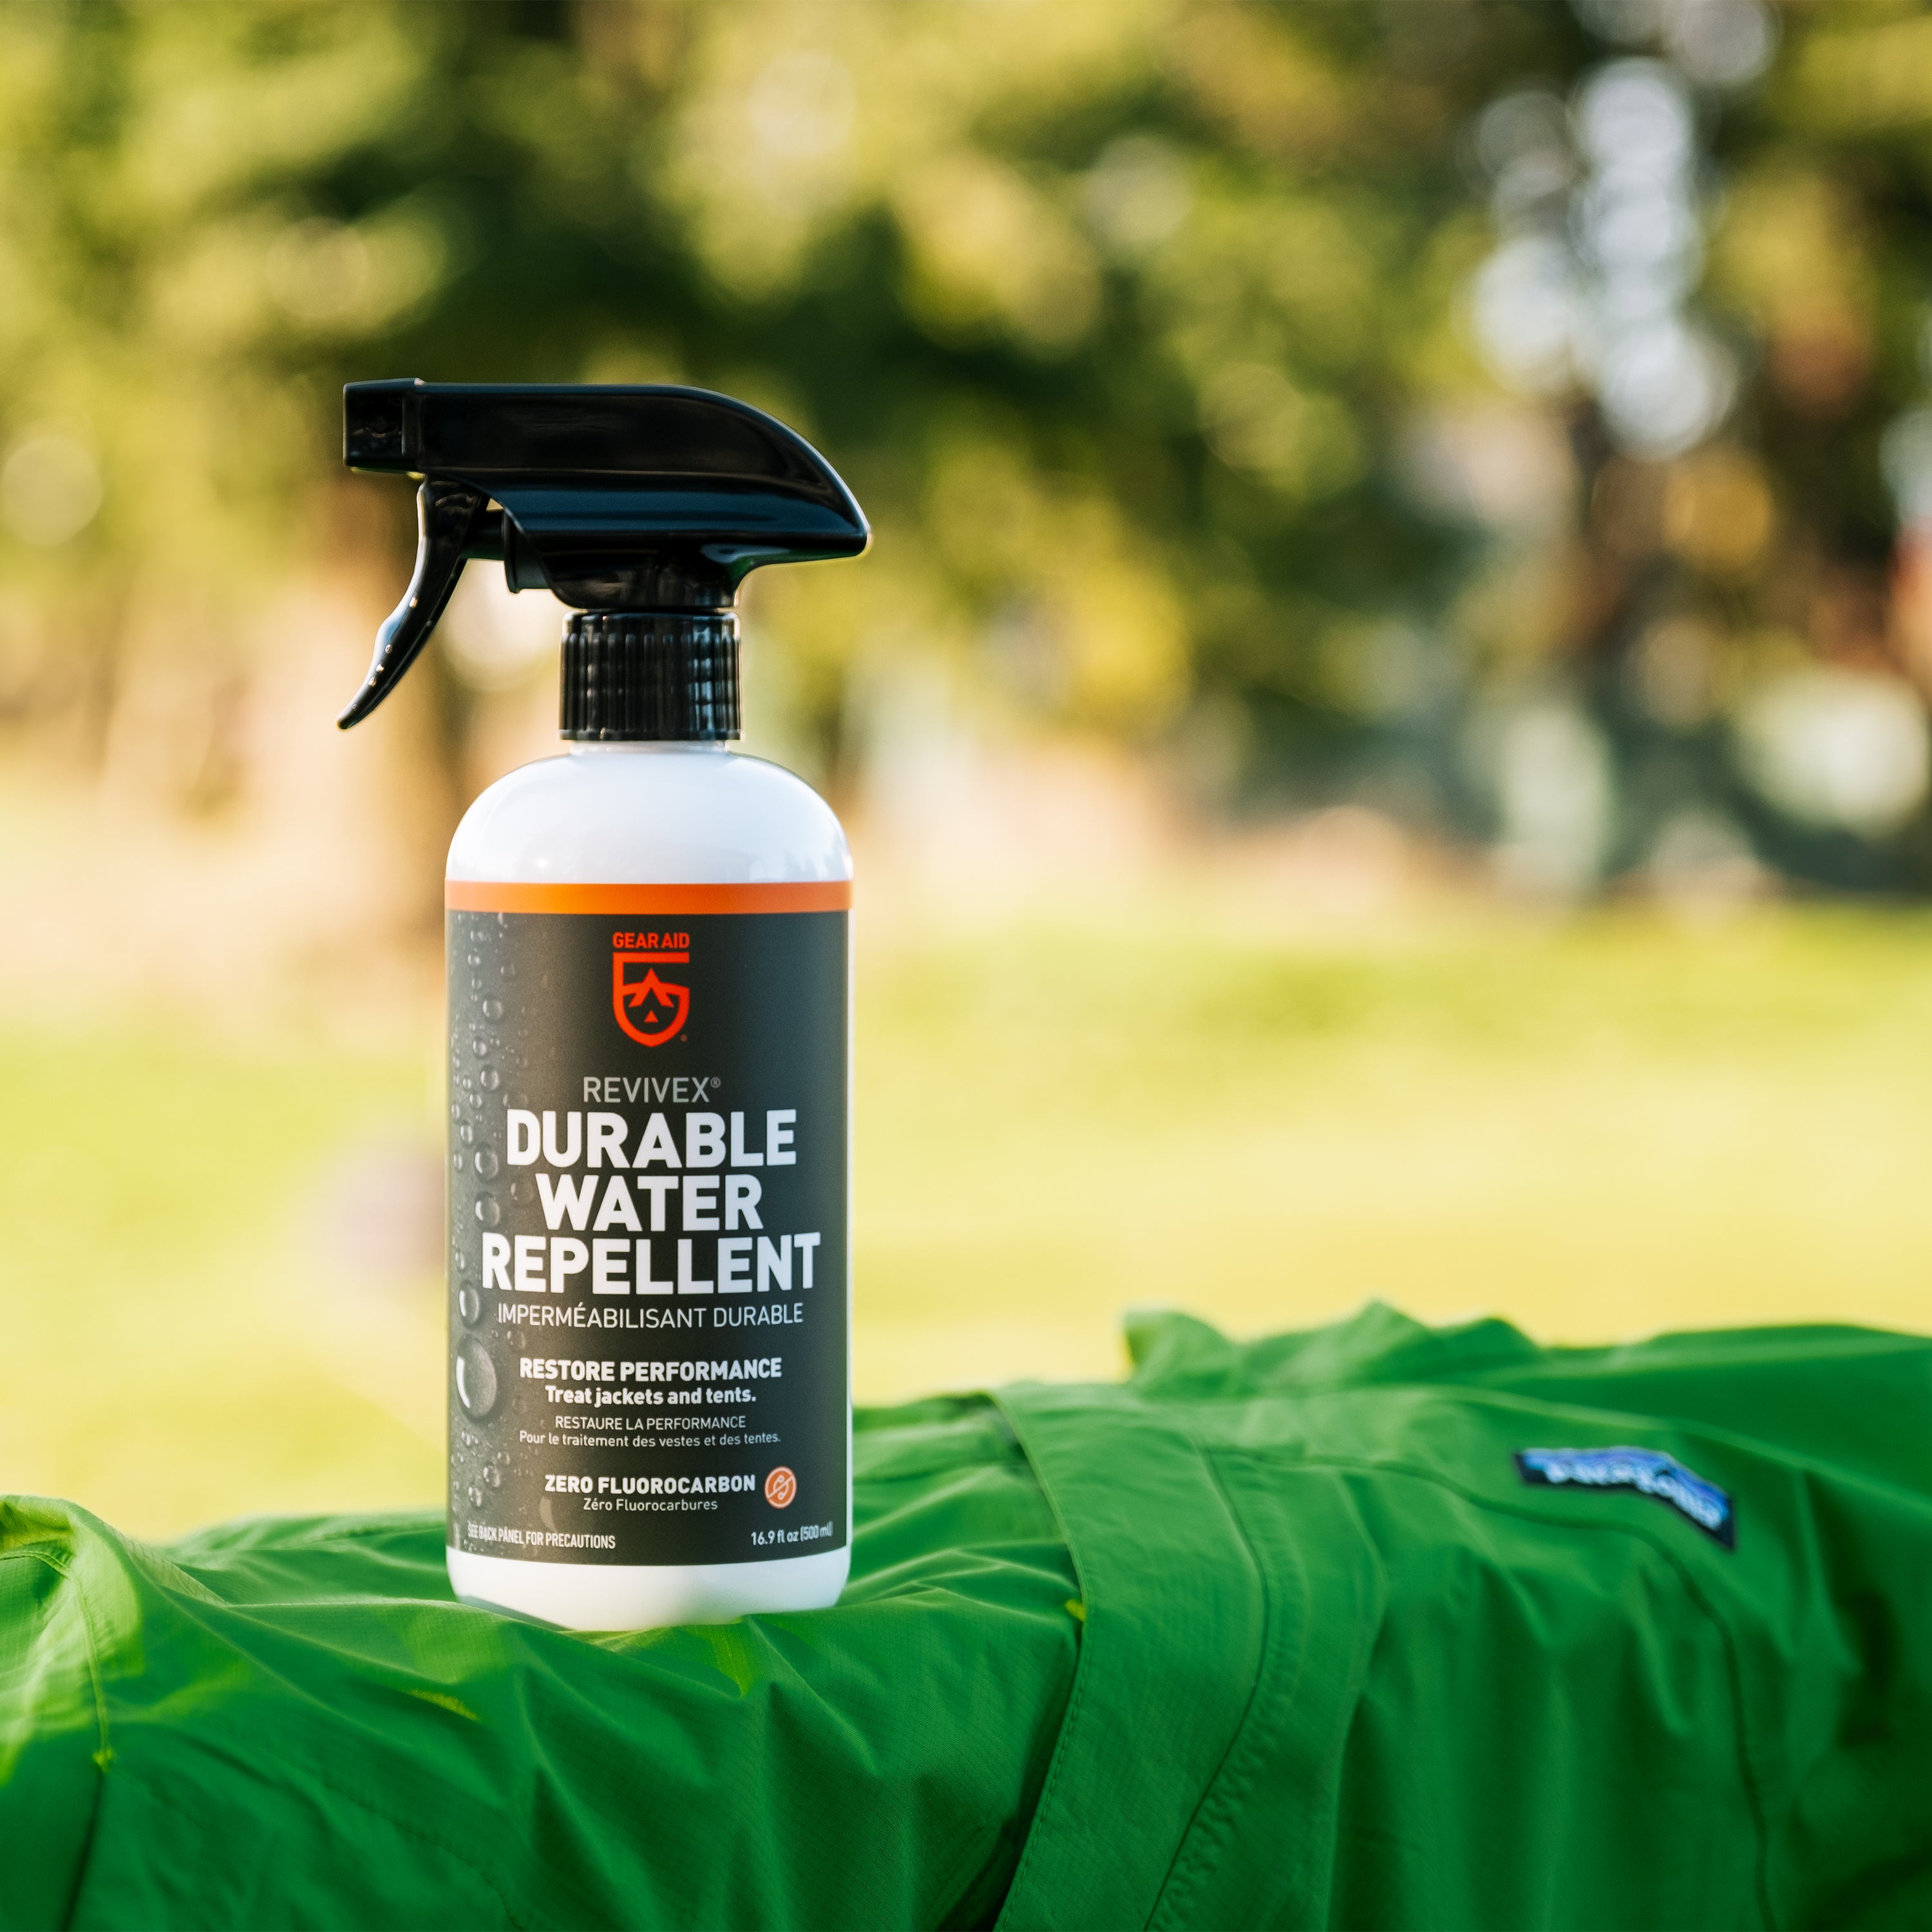 7 Best Waterproofing Sprays for Hiking Gear and Clothes